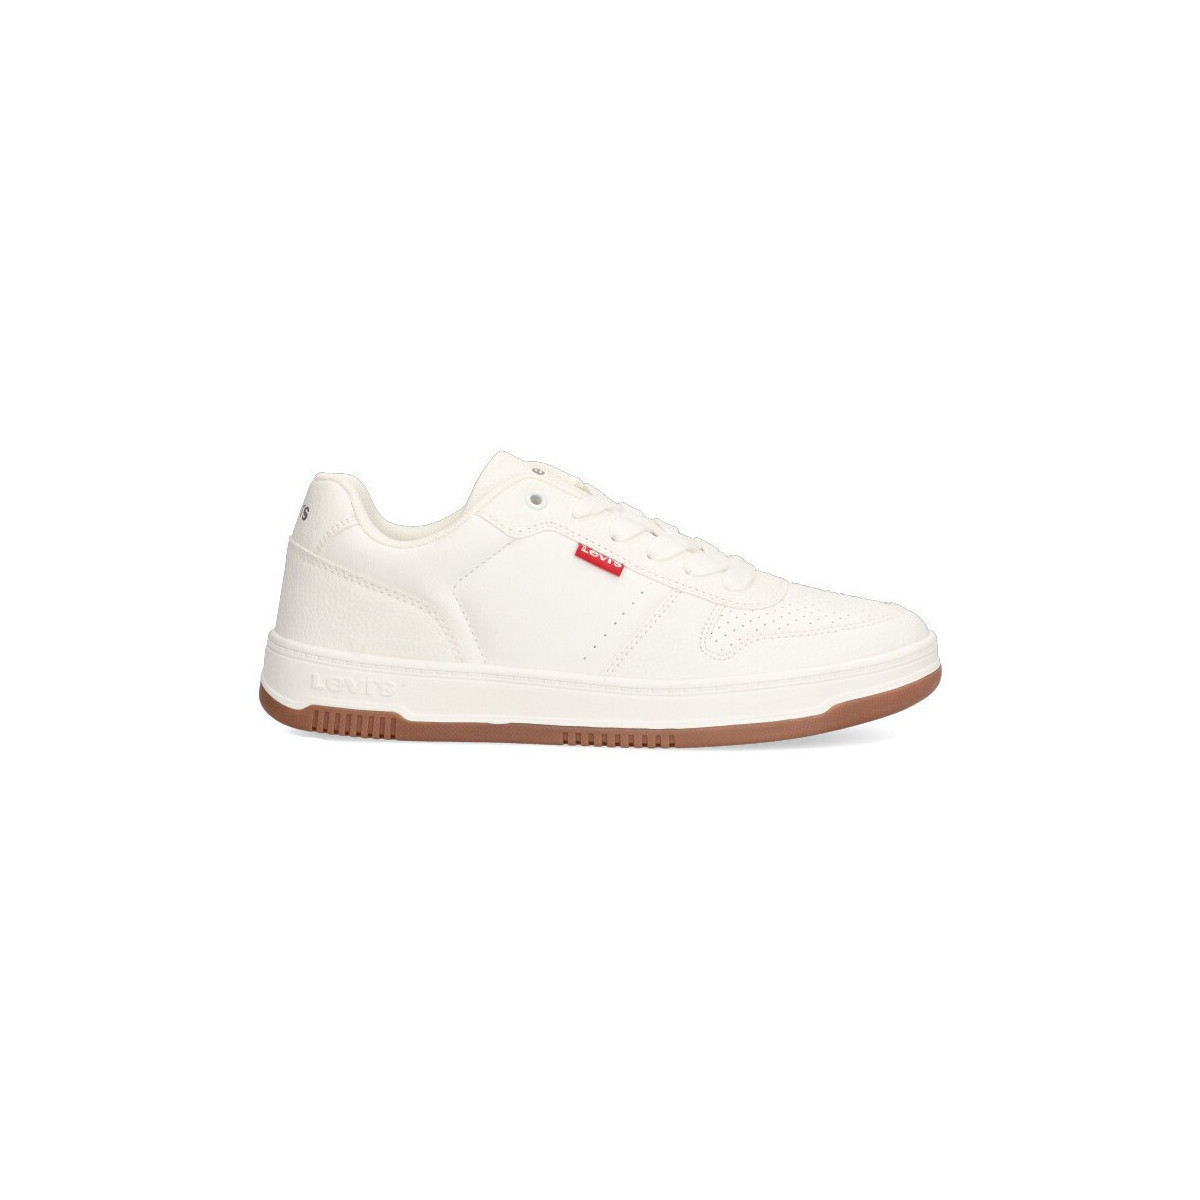 Chaussures Homme Baskets mode Levi's 74171 Blanc